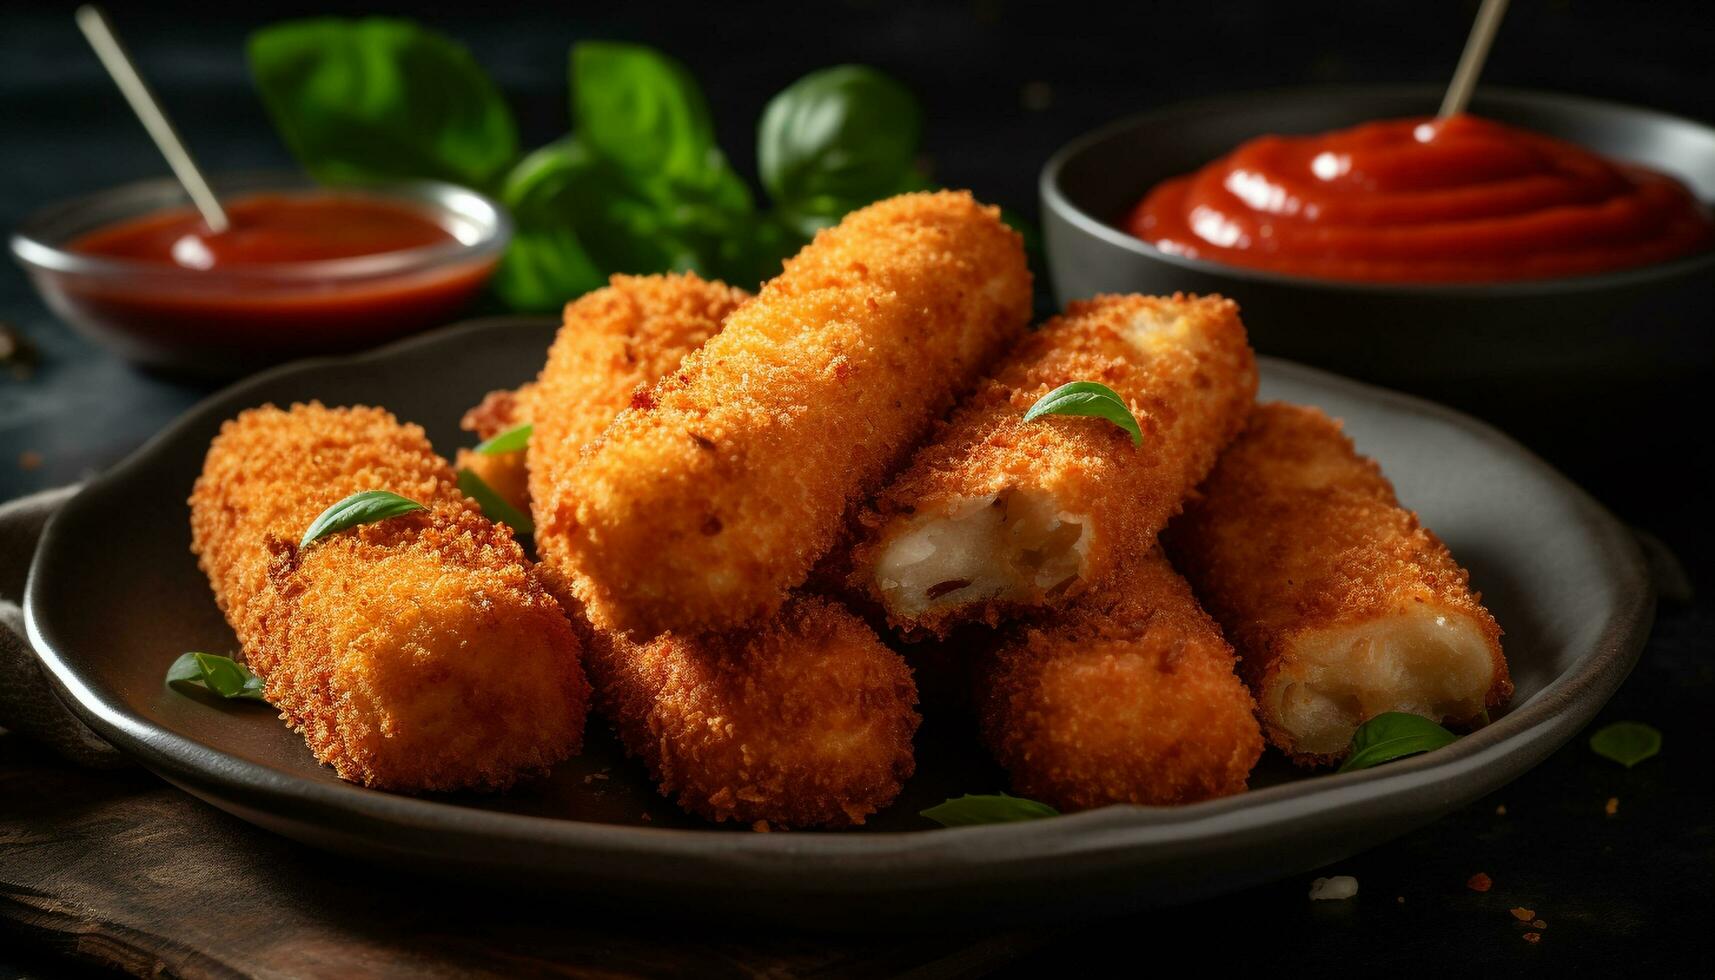 Deep fried chicken nuggets with savory sauce, perfect pub food appetizer generated by AI photo